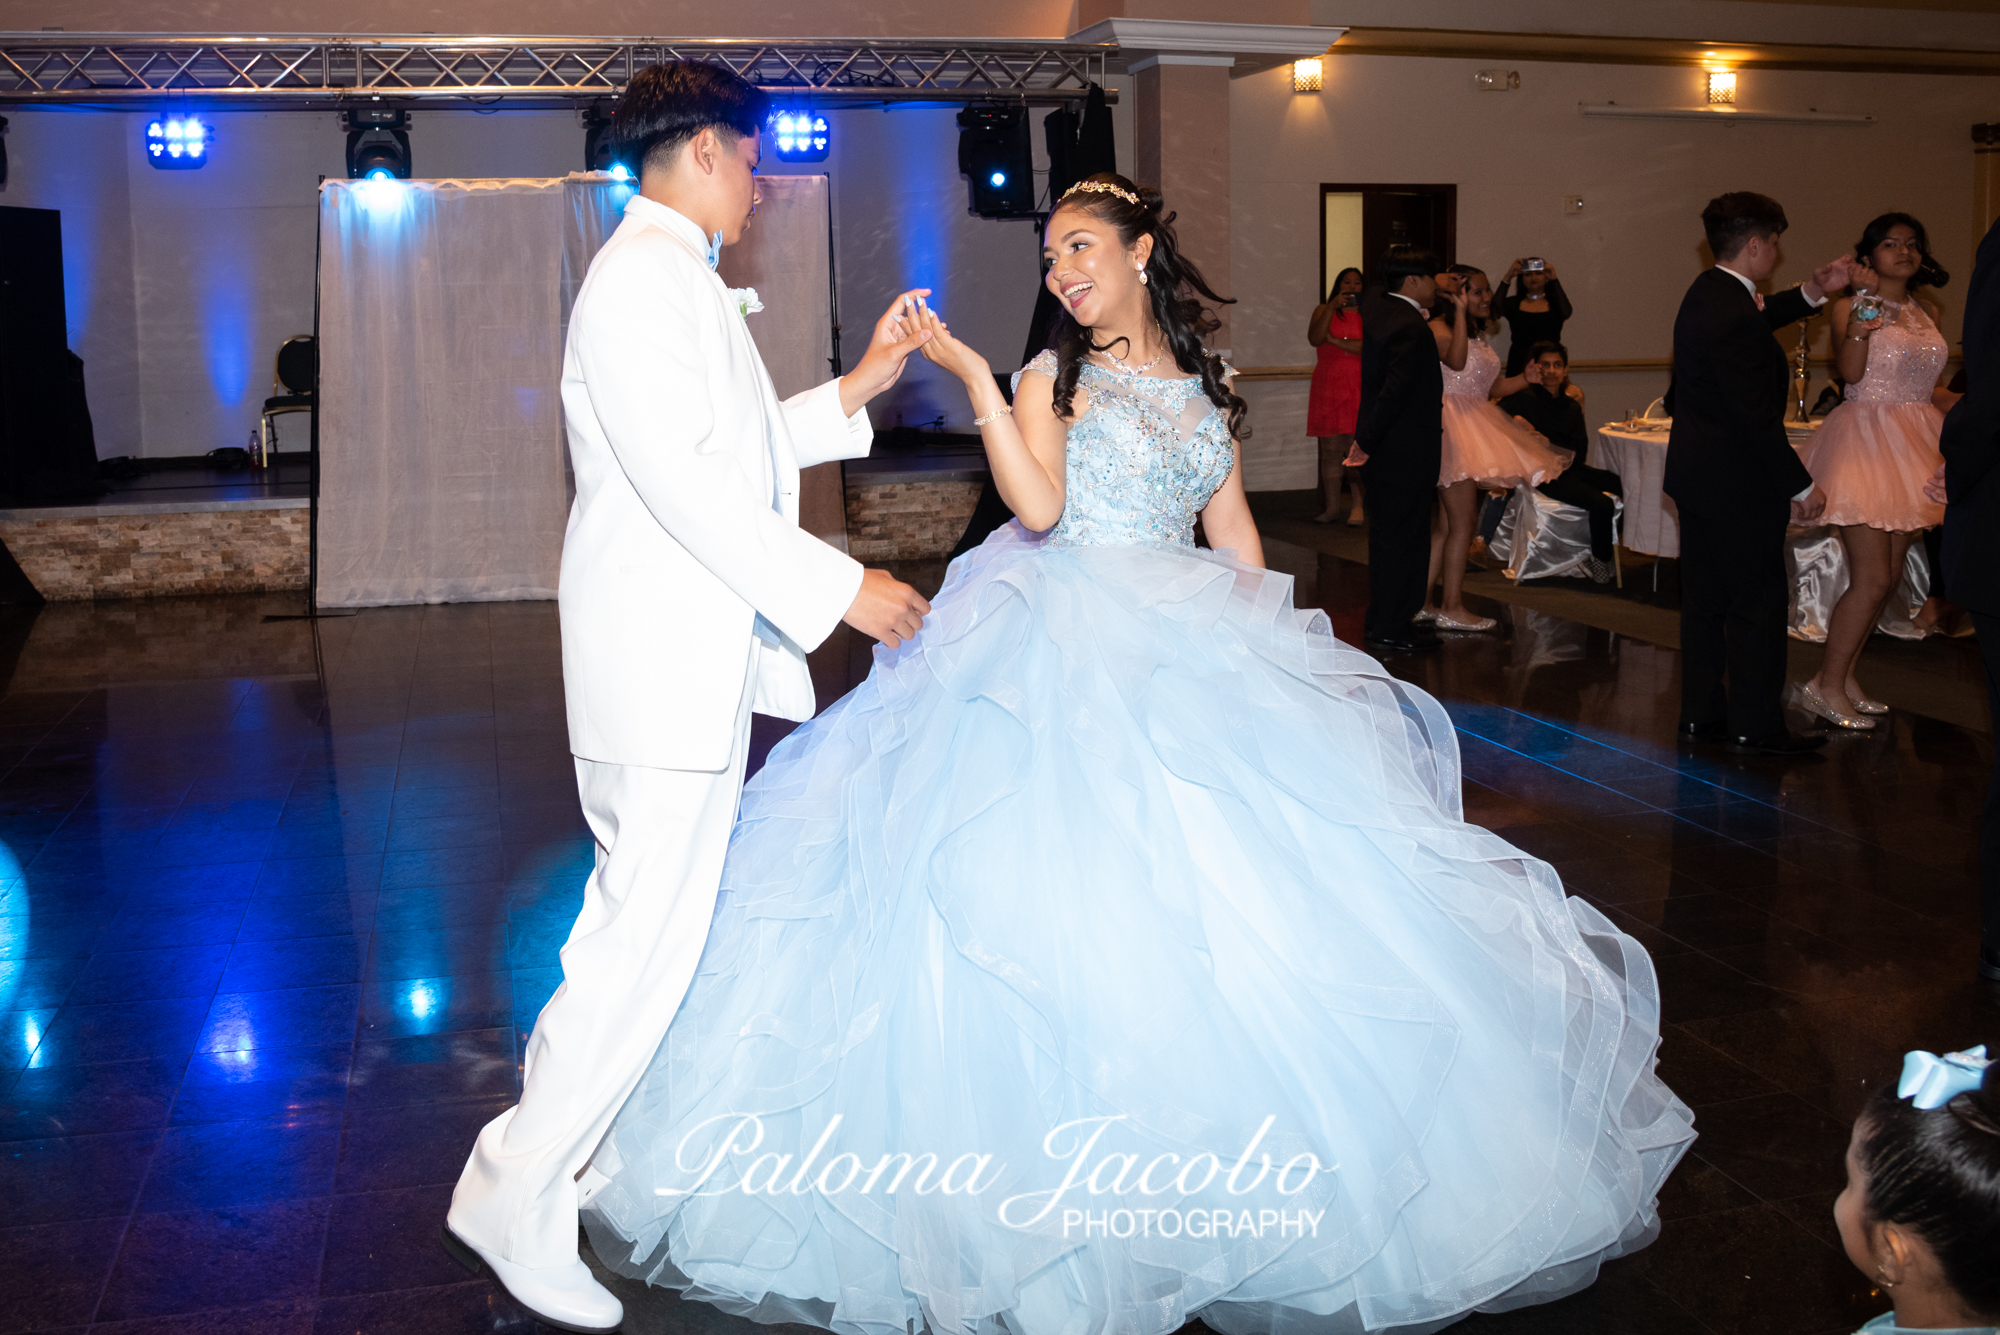 Quinceanera dancing by Paloma Jacobo Photography